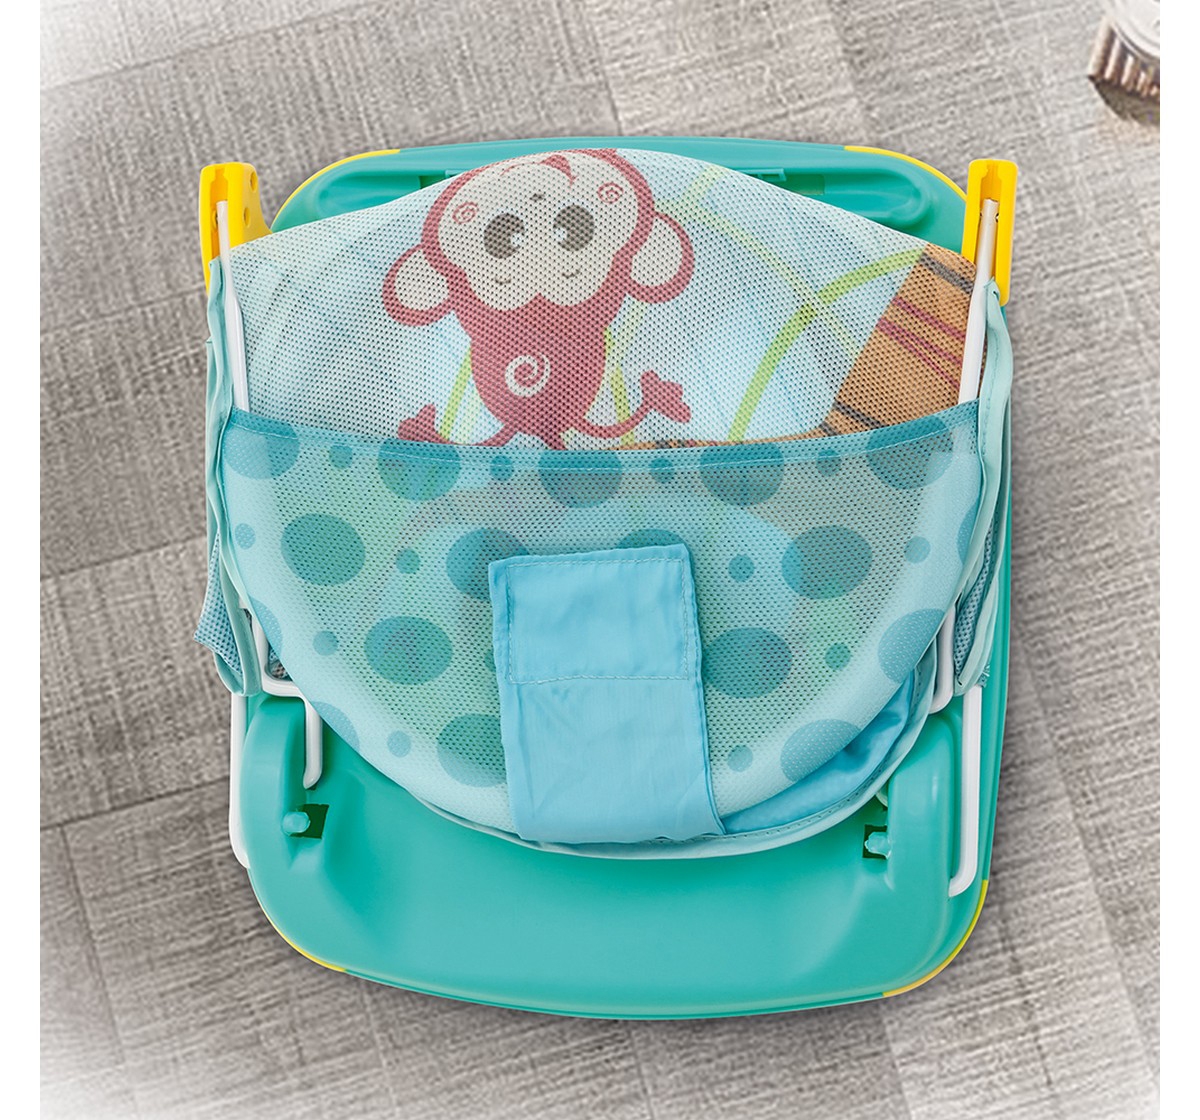 Mothercare | Mastela Deluxe Baby Bather 7167 Teal 6